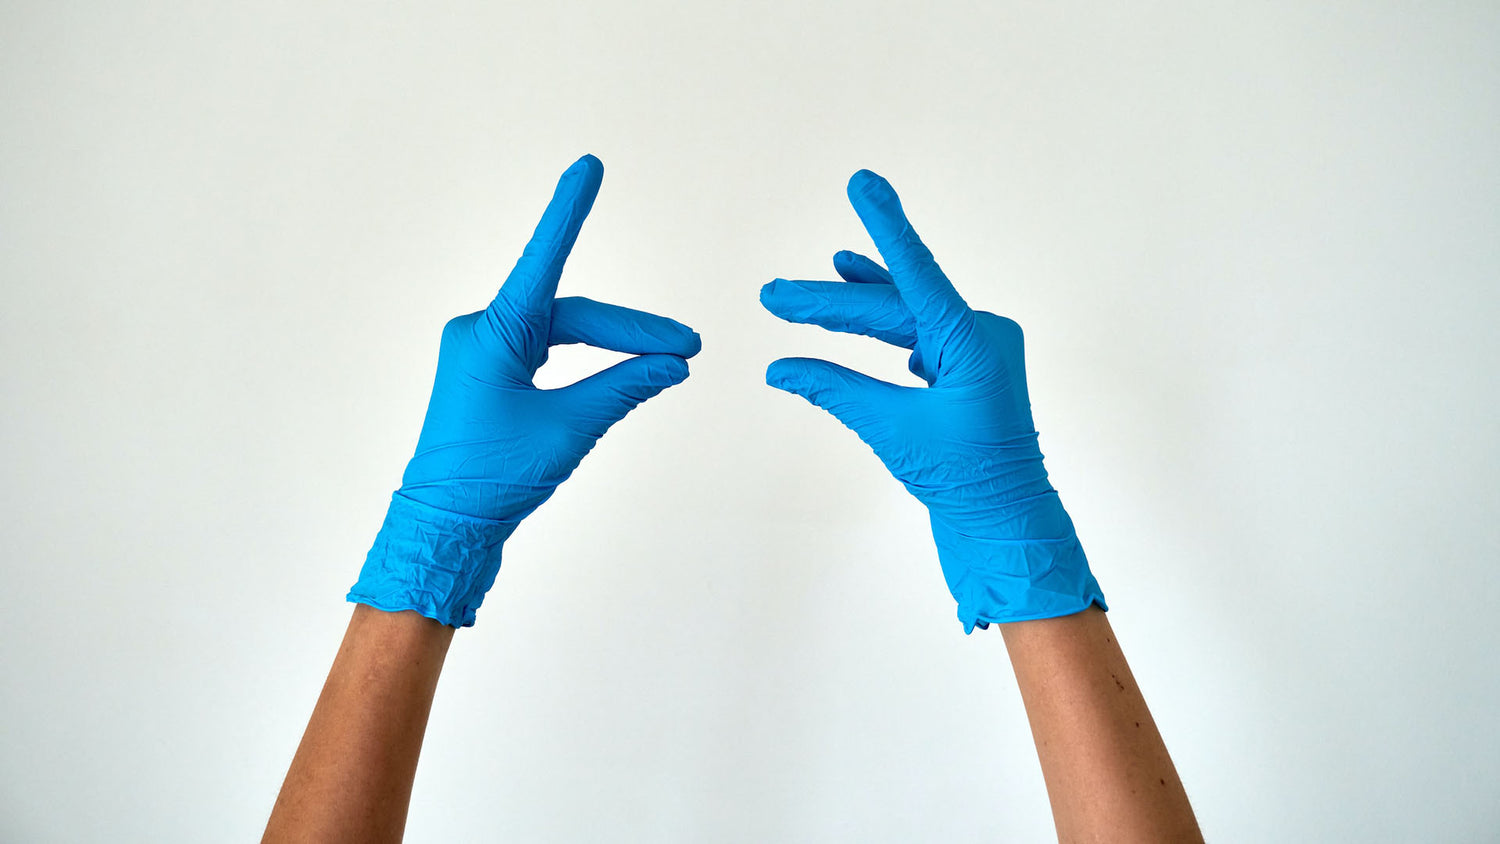 gloved hands reaching into the air